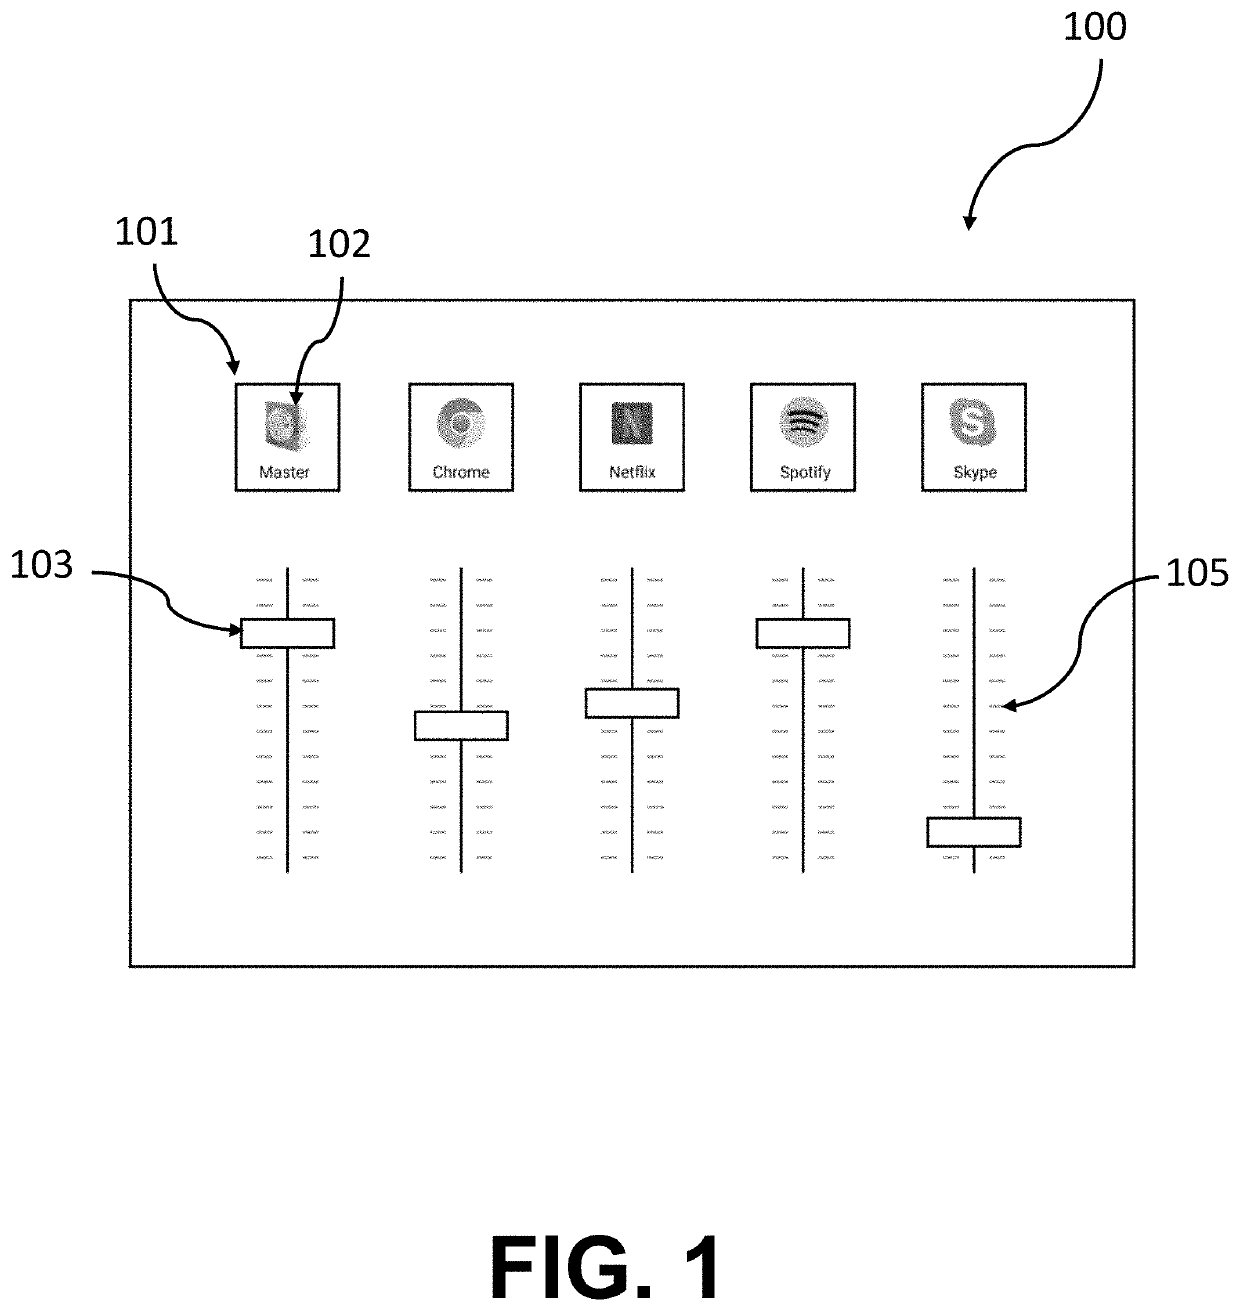 Apparatus to Visualize System Applications Volume Control